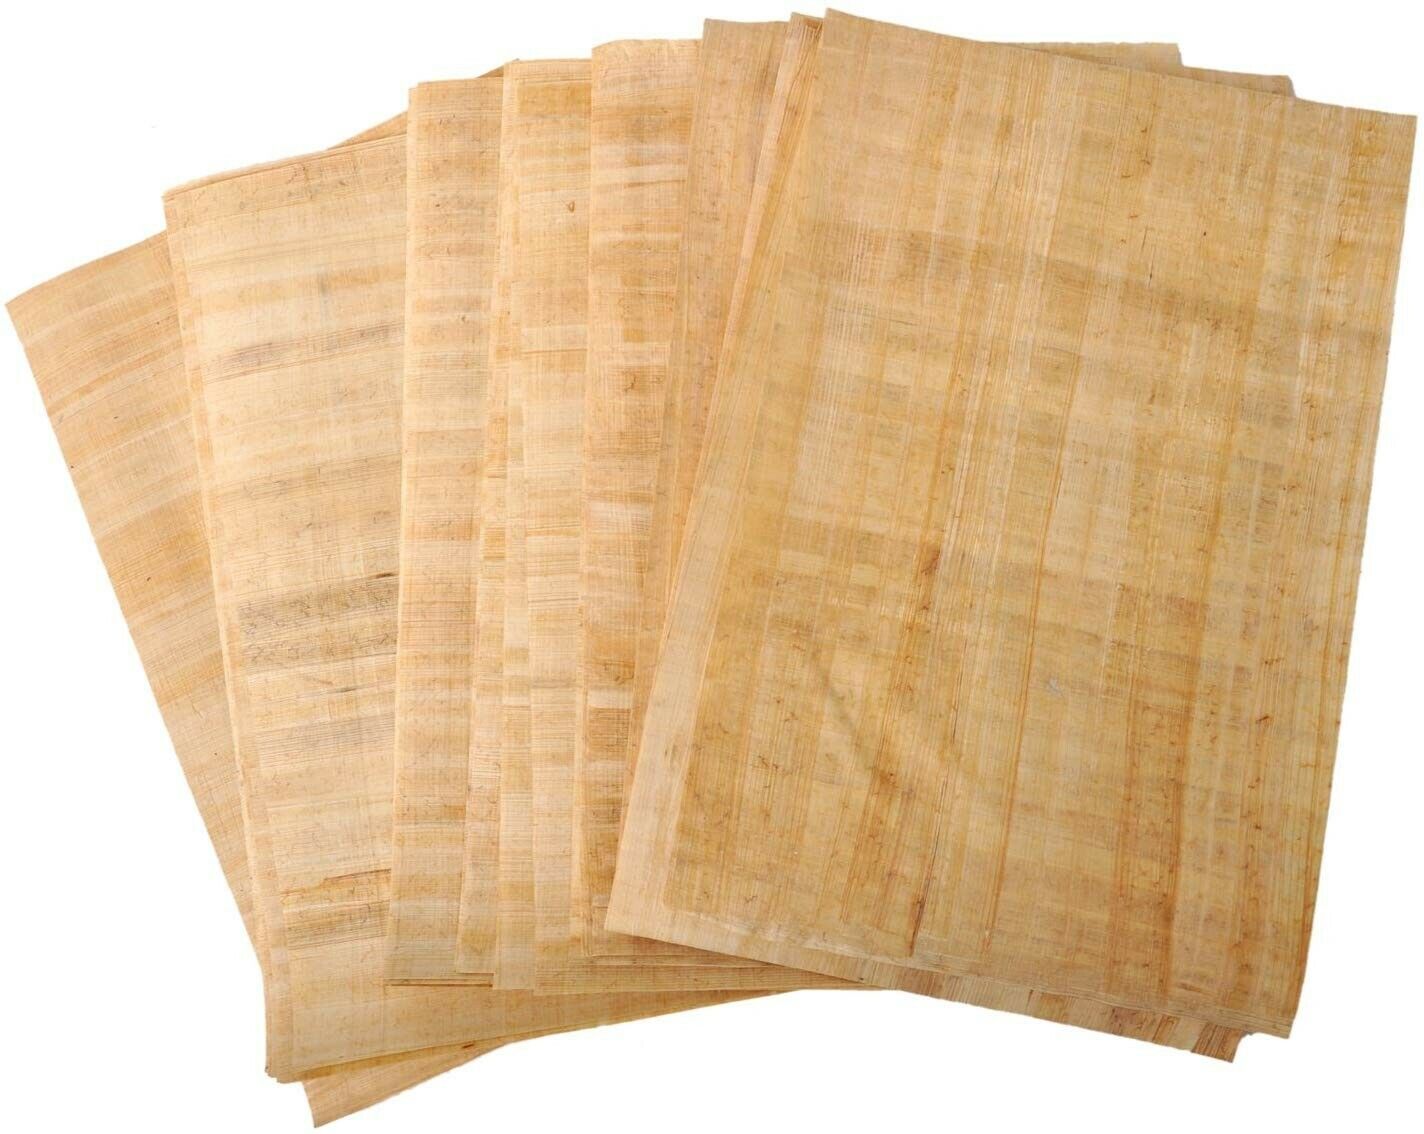 20 Blank Egyptian Papyrus Sheets for Art Projects and Schools 8x12in 20x30cm